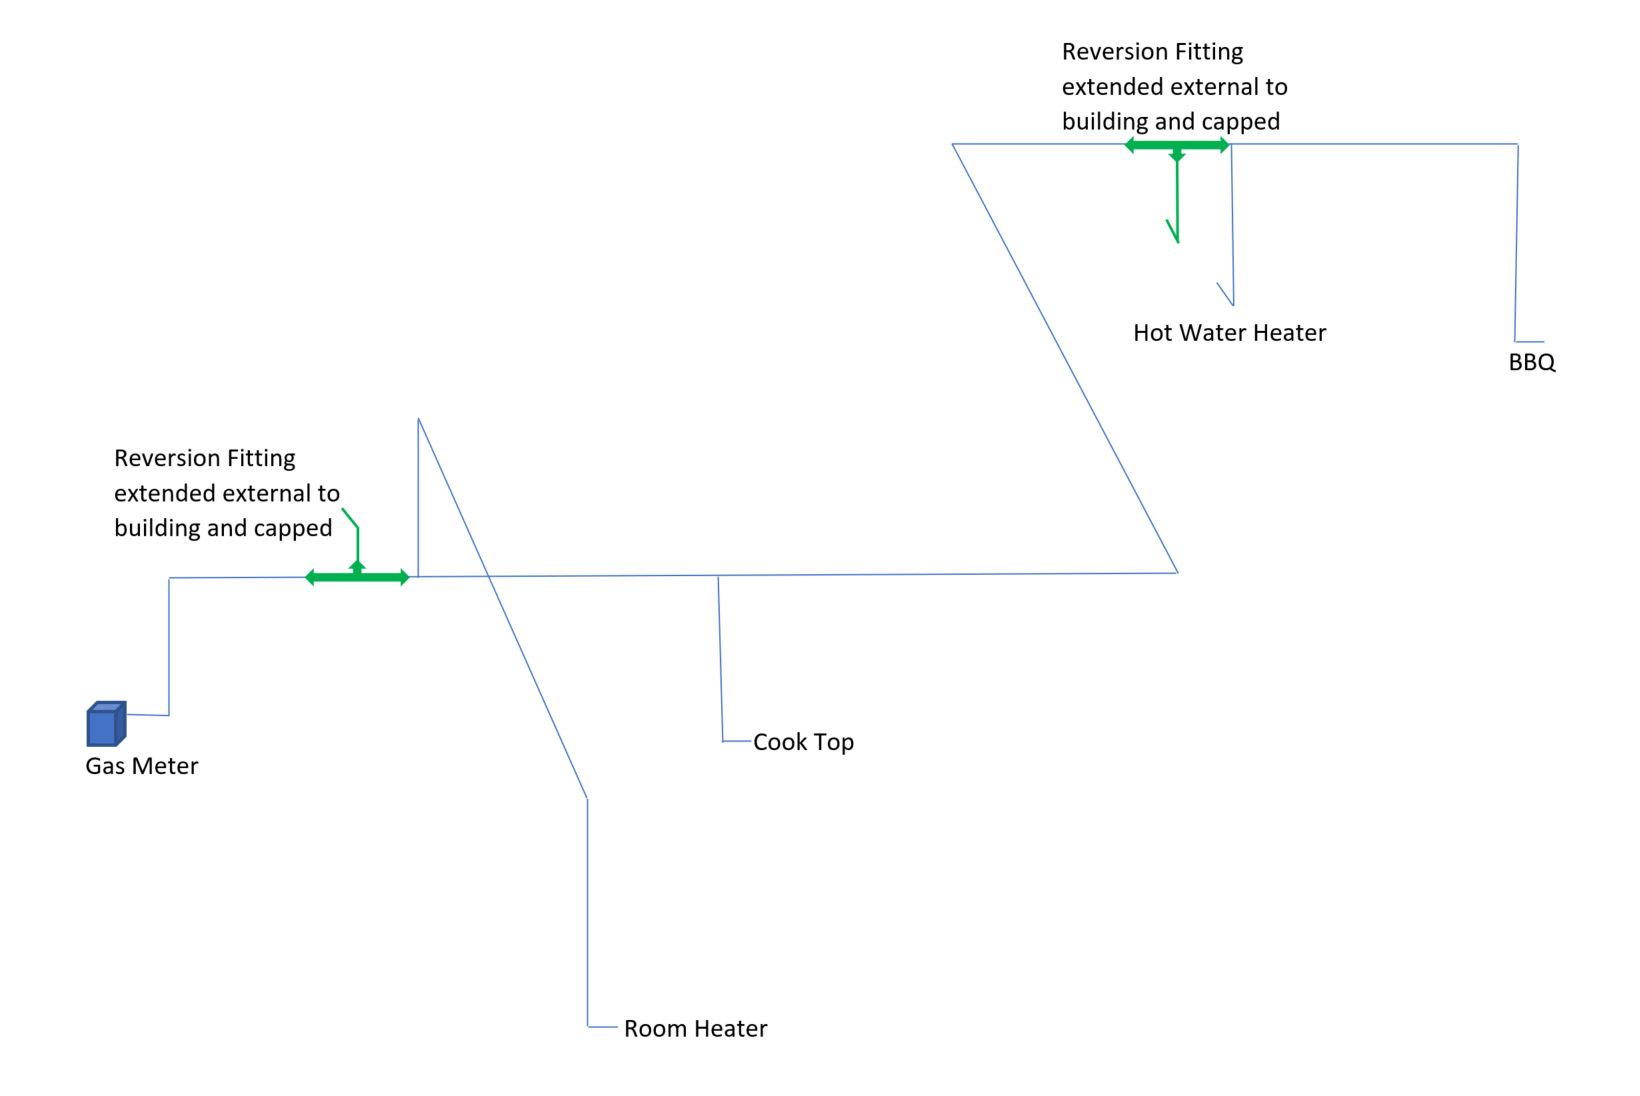 Line diagram of a reversion fitting extended to external wall